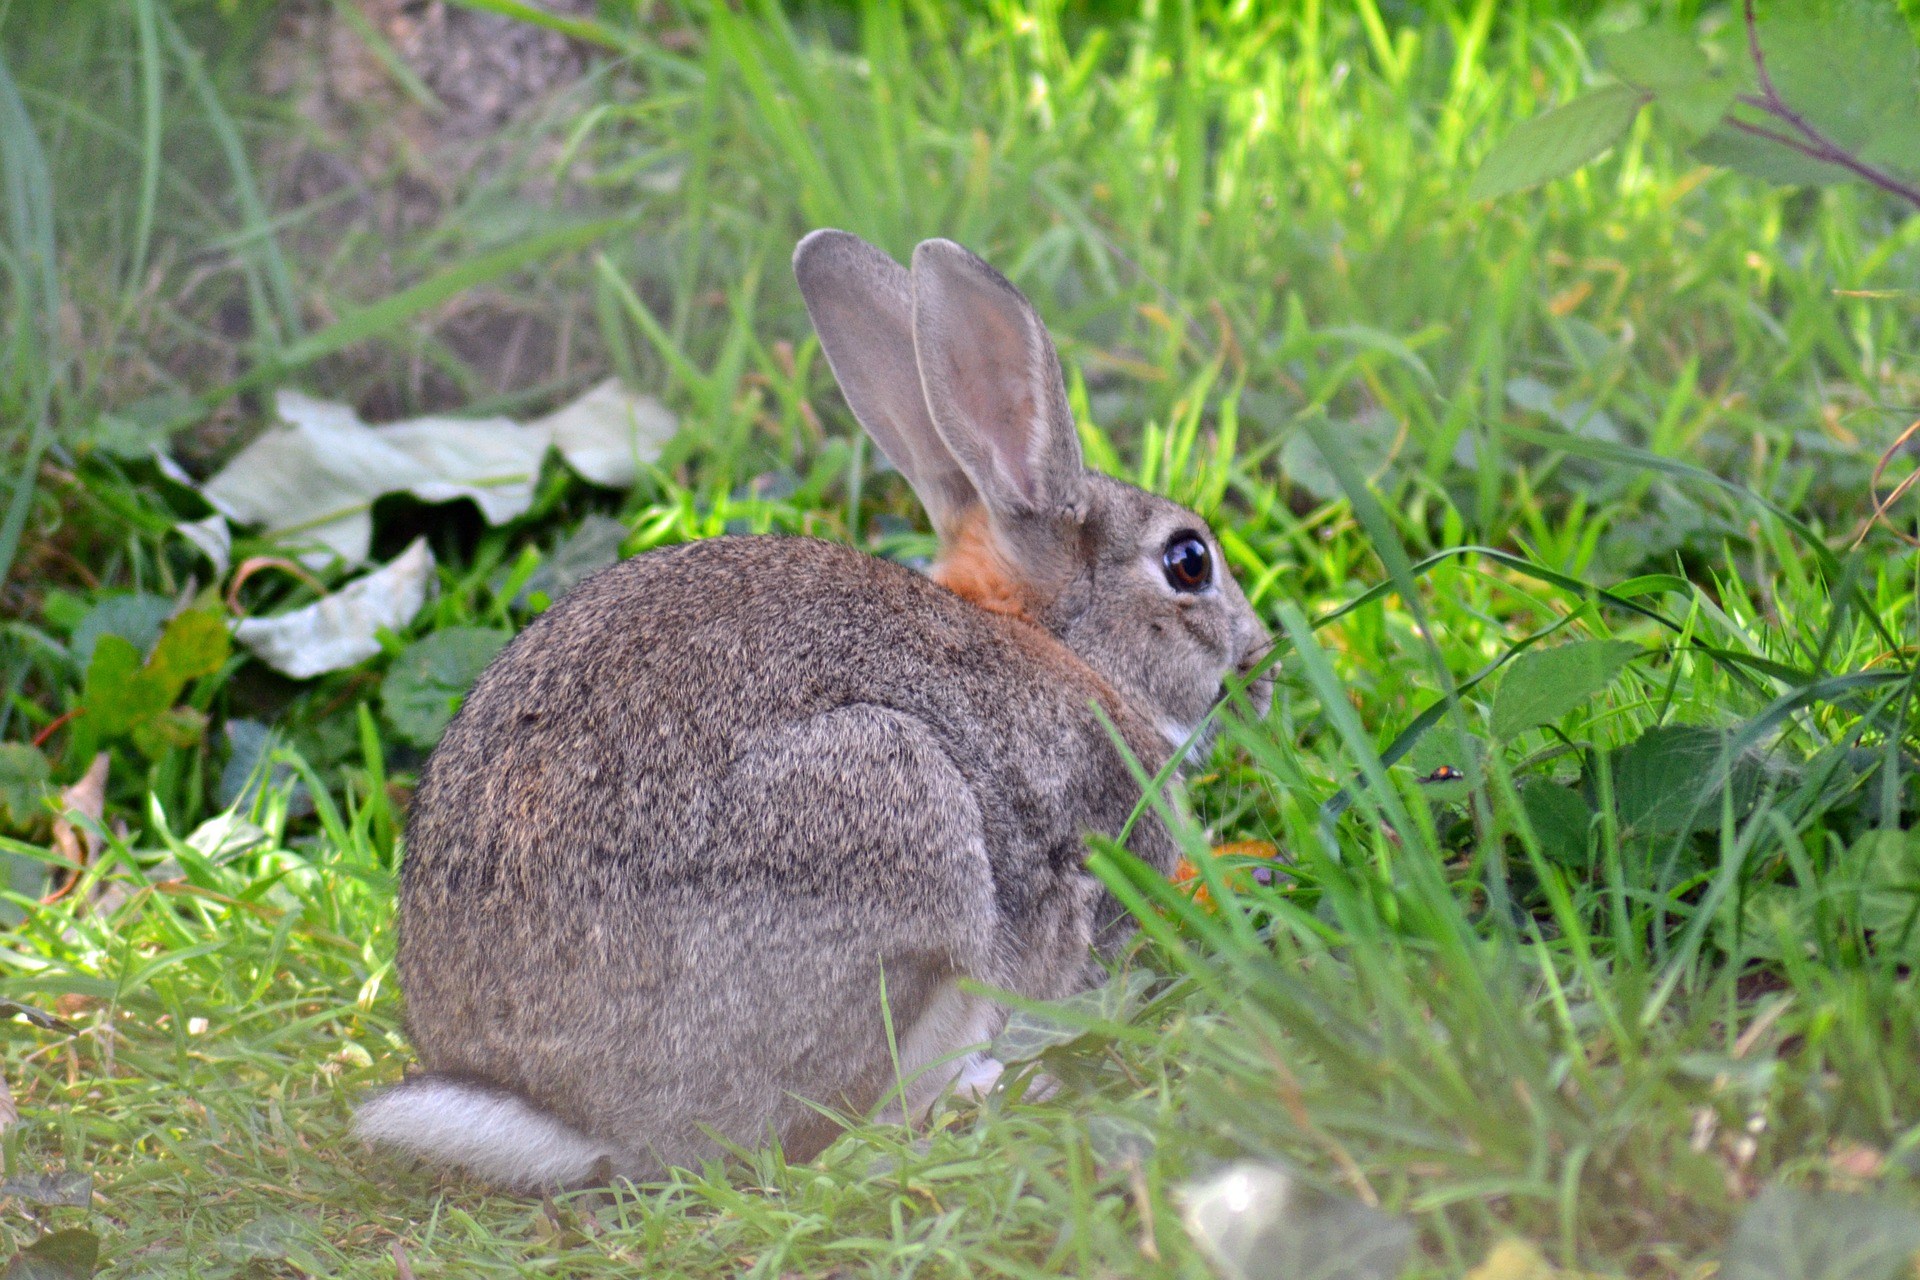 How to Keep Rabbits Away from the Garden Stop Rabbits from Eating Plants